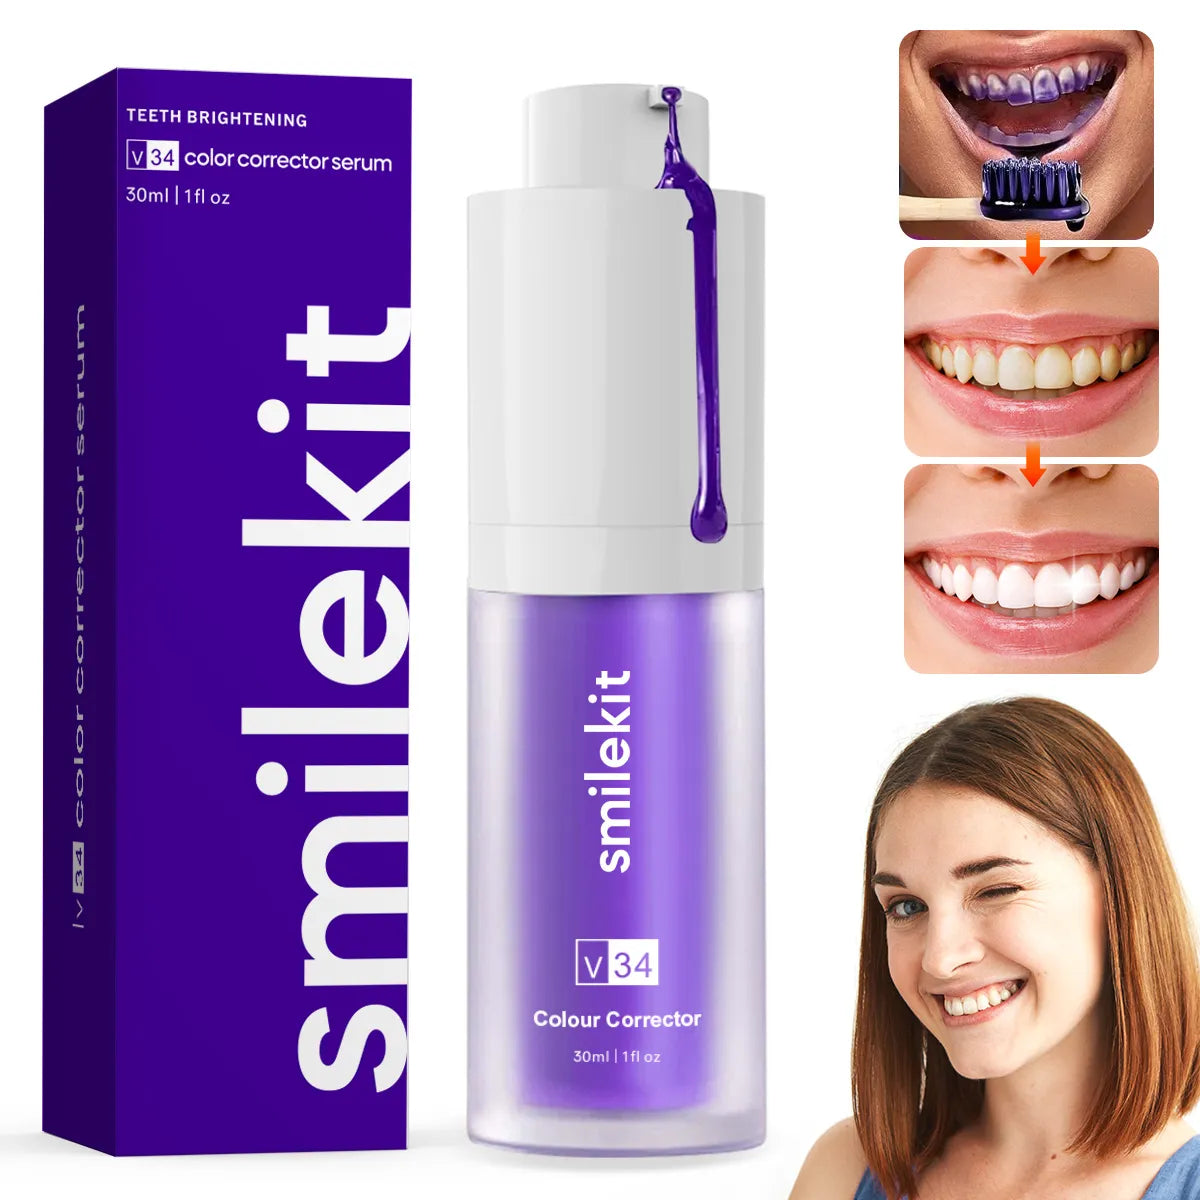 Teeth Whitening Purple Toothpaste Smile Kit: Reduce Yellowing and Brighten Your Oral Care Routine